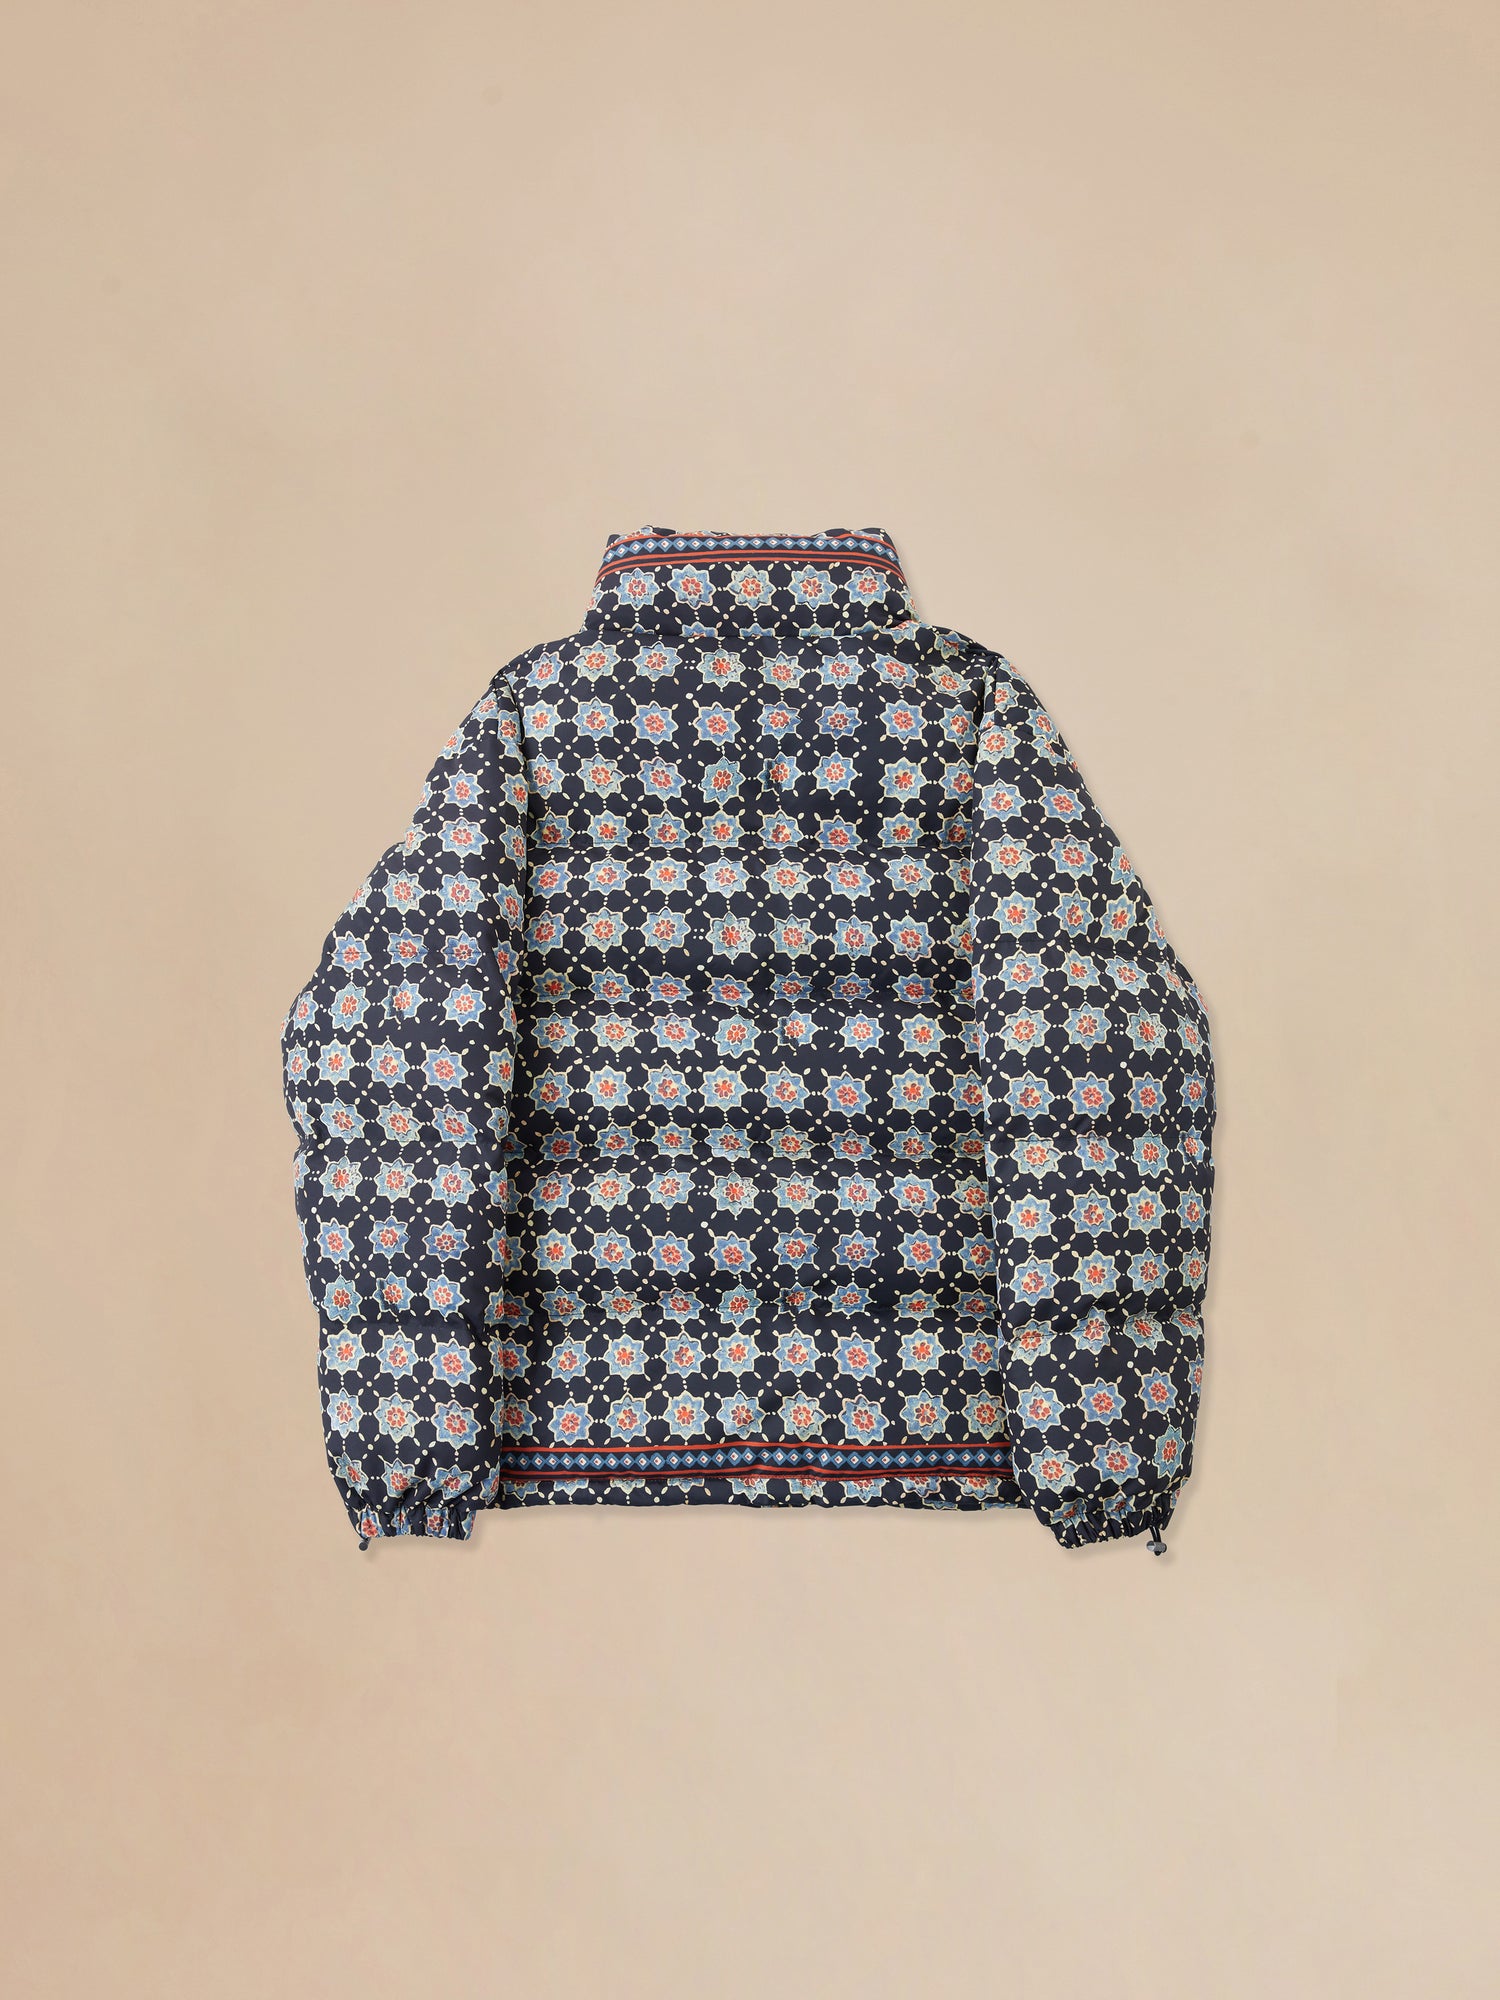 A Ajrak Block Puffer Jacket by Found with Pakistani block-printed patterns on the back.